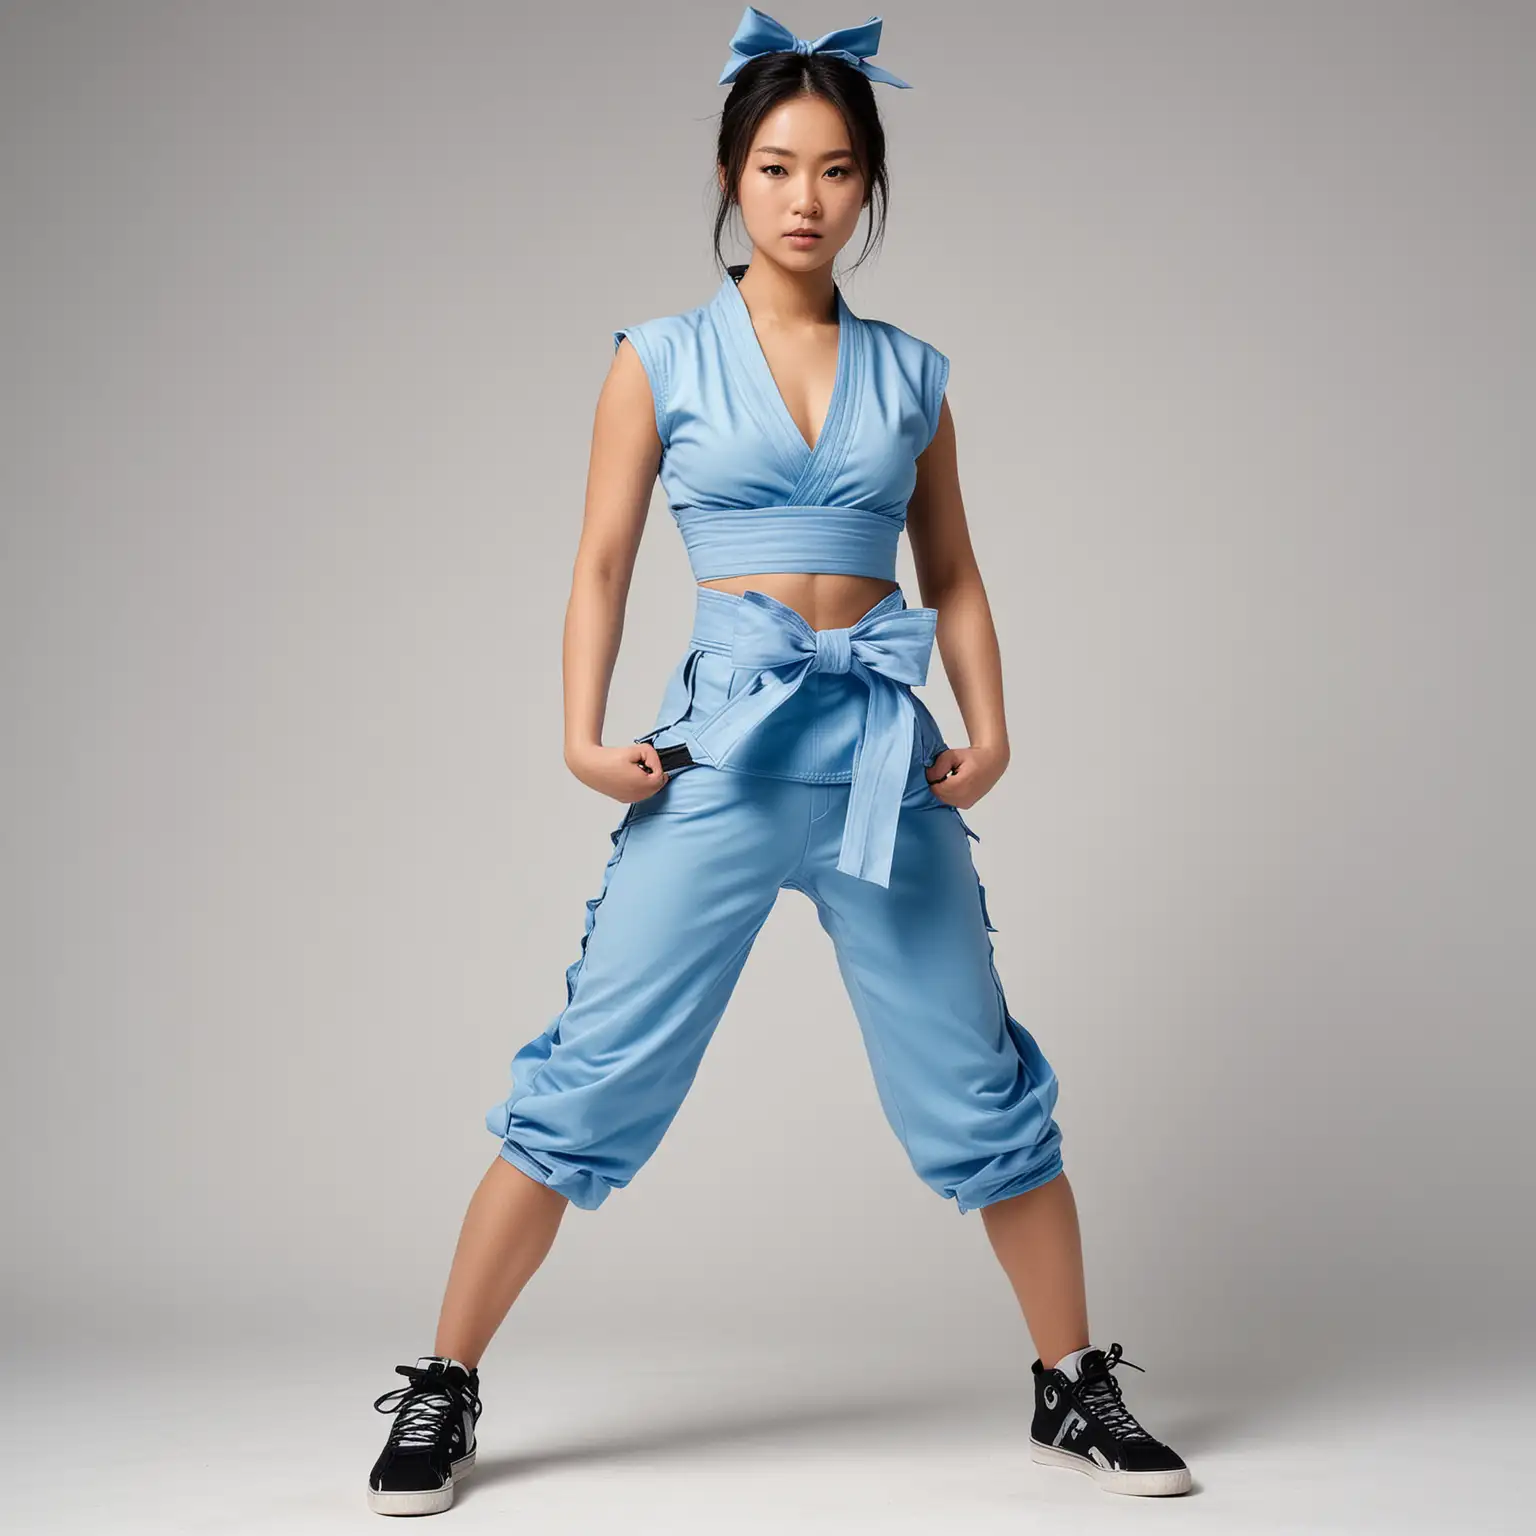 Standing full body view, strong toned beautiful Japanese supermodel in sleeveless, light-blue low-cut croptop karate gi exposing cleavage, black belt with giant bow, high-waisted tight black tights, black sneakers, sneakers, white background